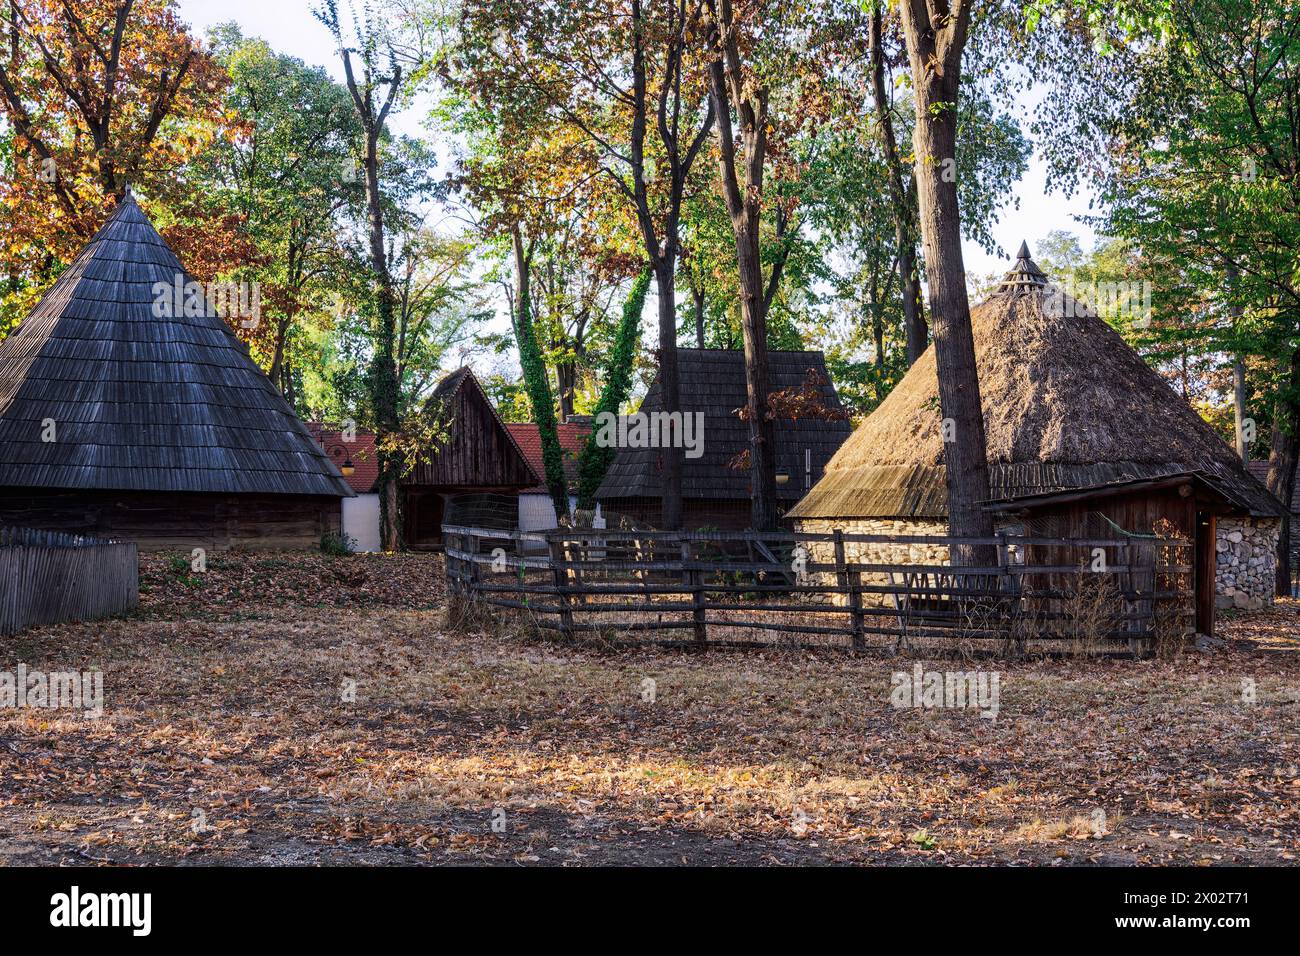 Authentic peasant settlements exhibiting traditional Romanian village life inside Dimitrie Gusti National Village Museum, Bucharest, Romania, Europe Stock Photo